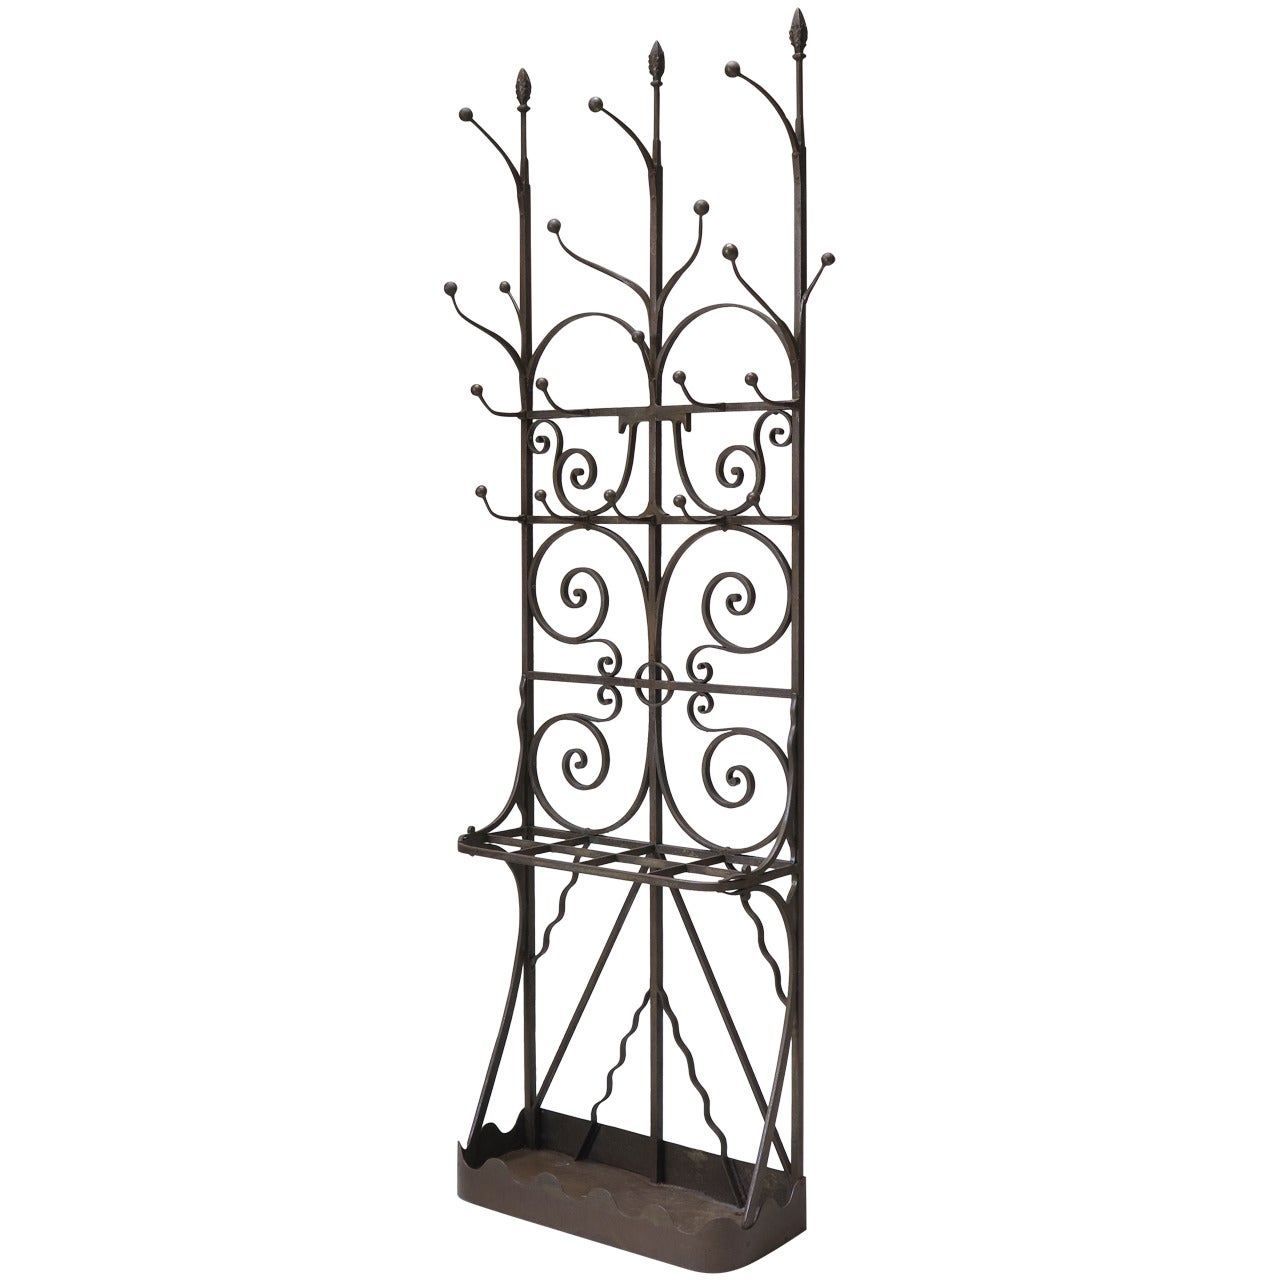 Neo-Gothic Wrought Iron Coat Stand, France Early 1900s